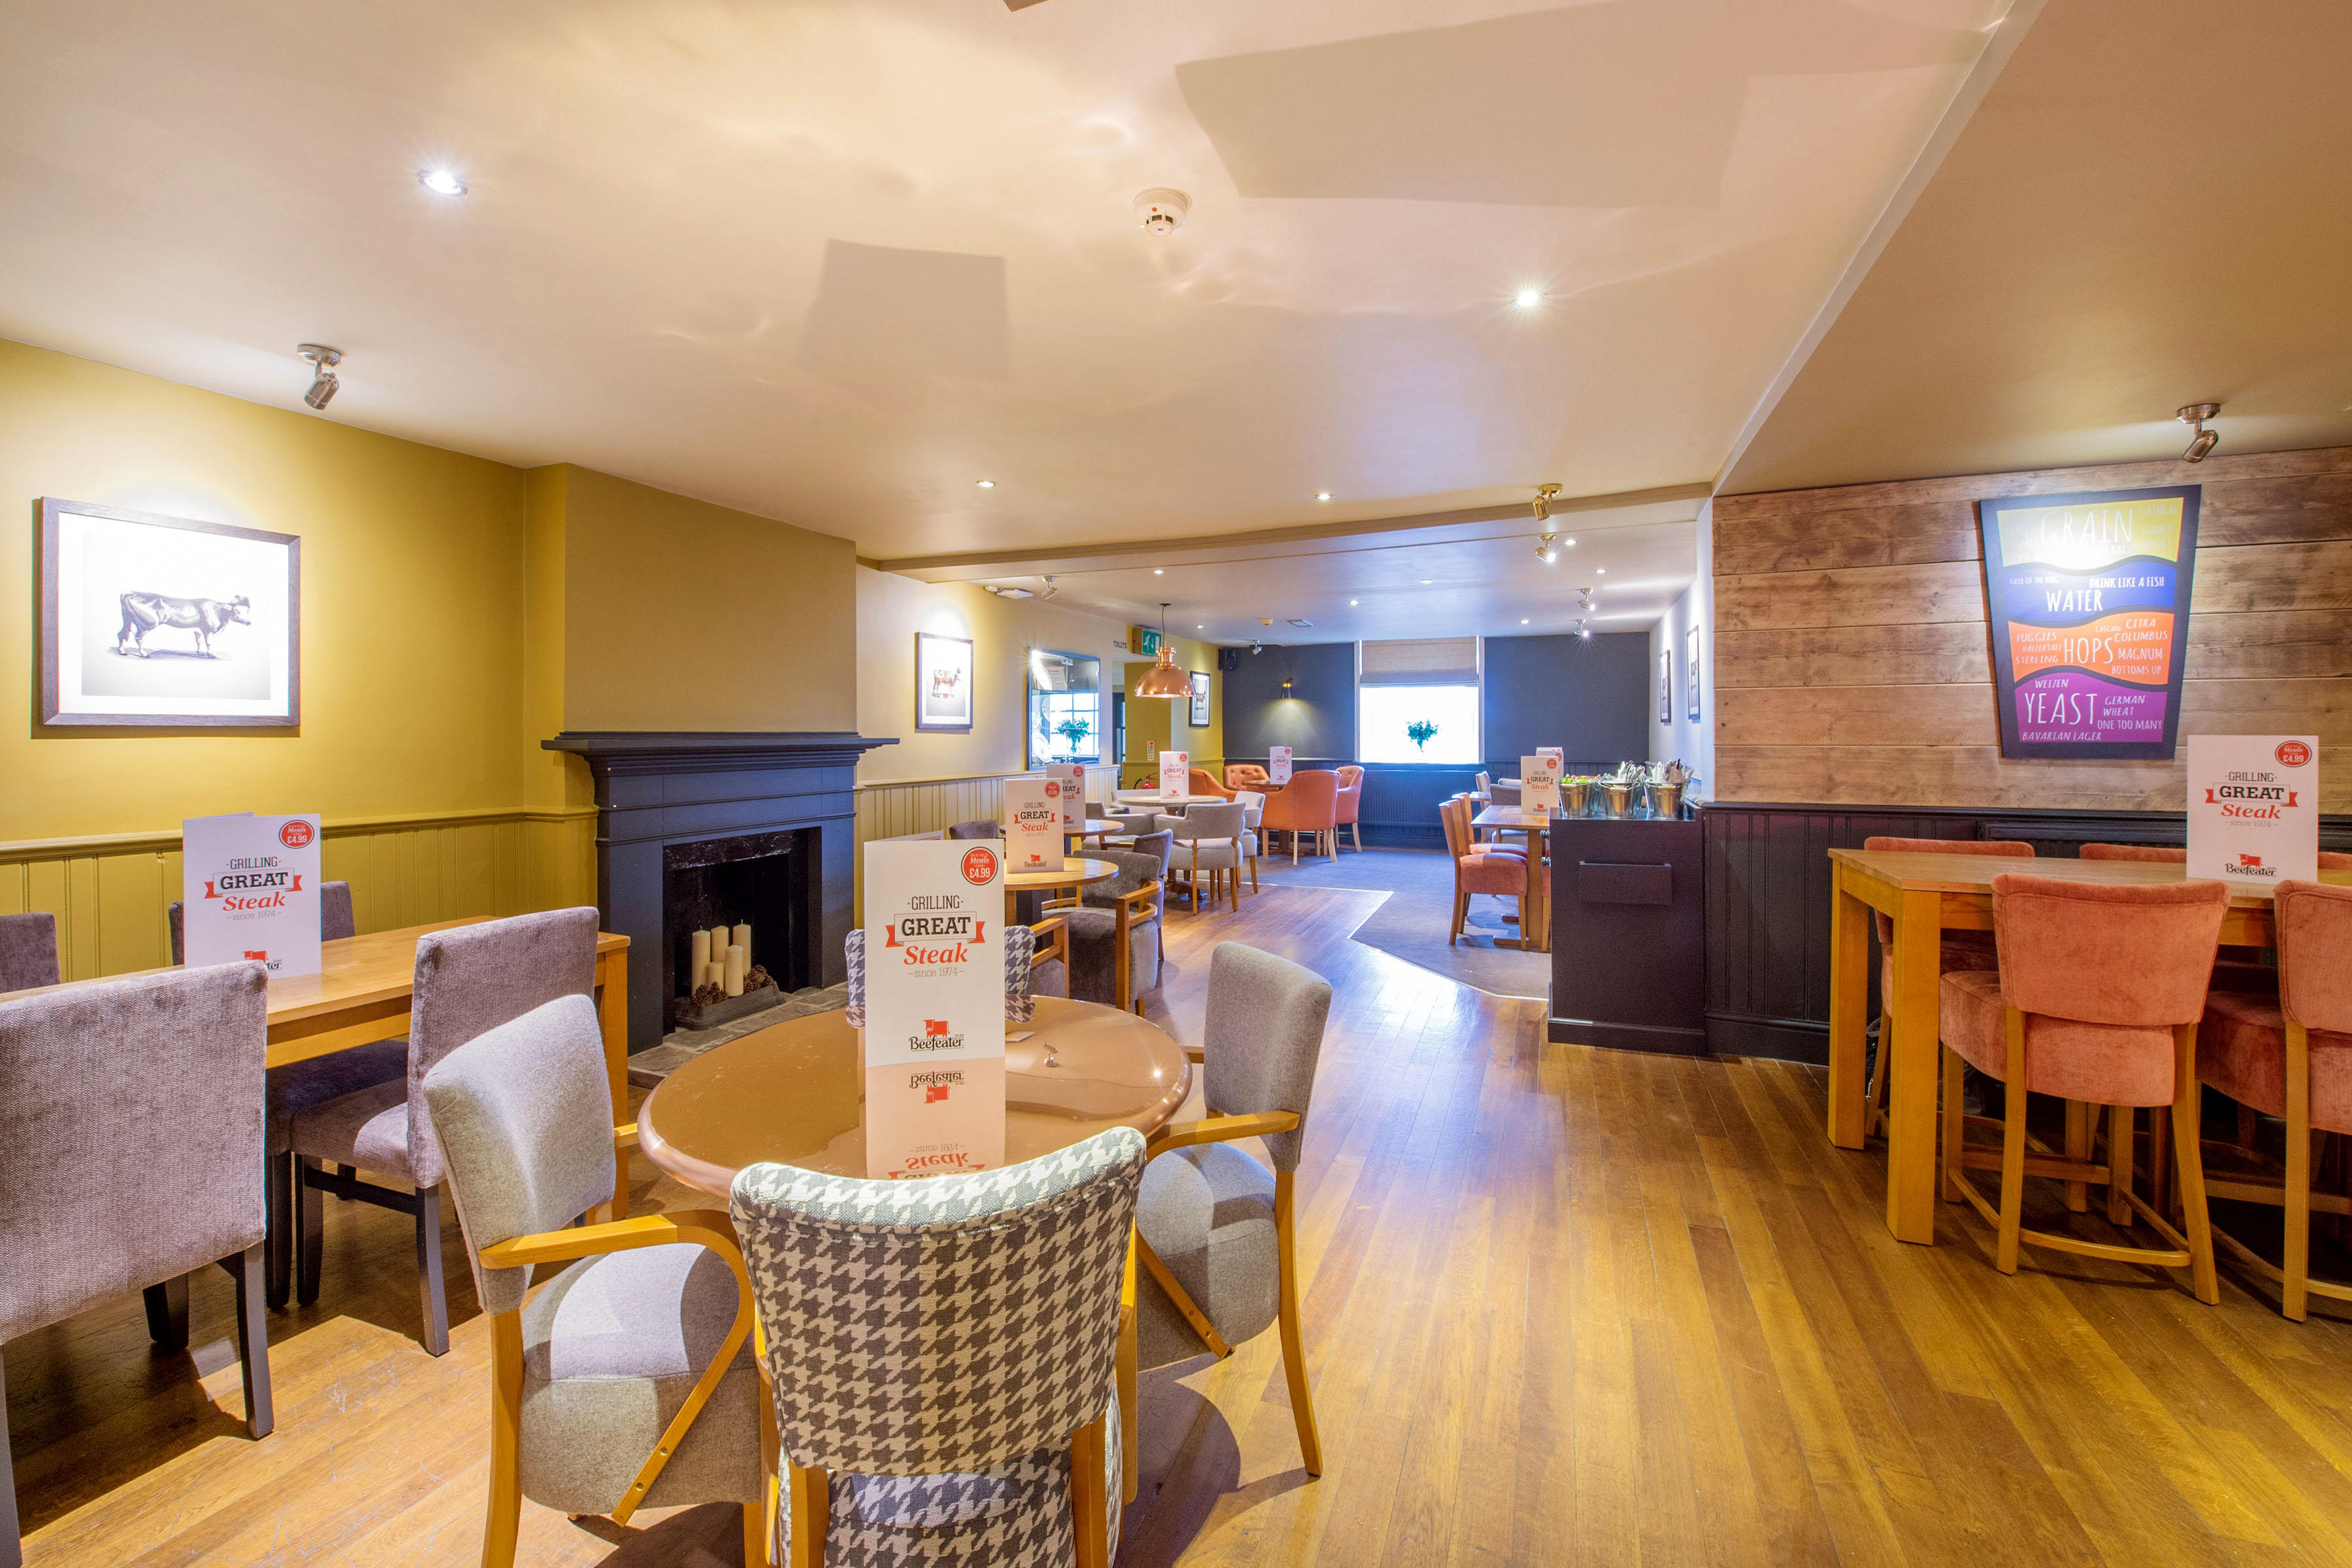 Images Premier Inn Chesterfield West hotel